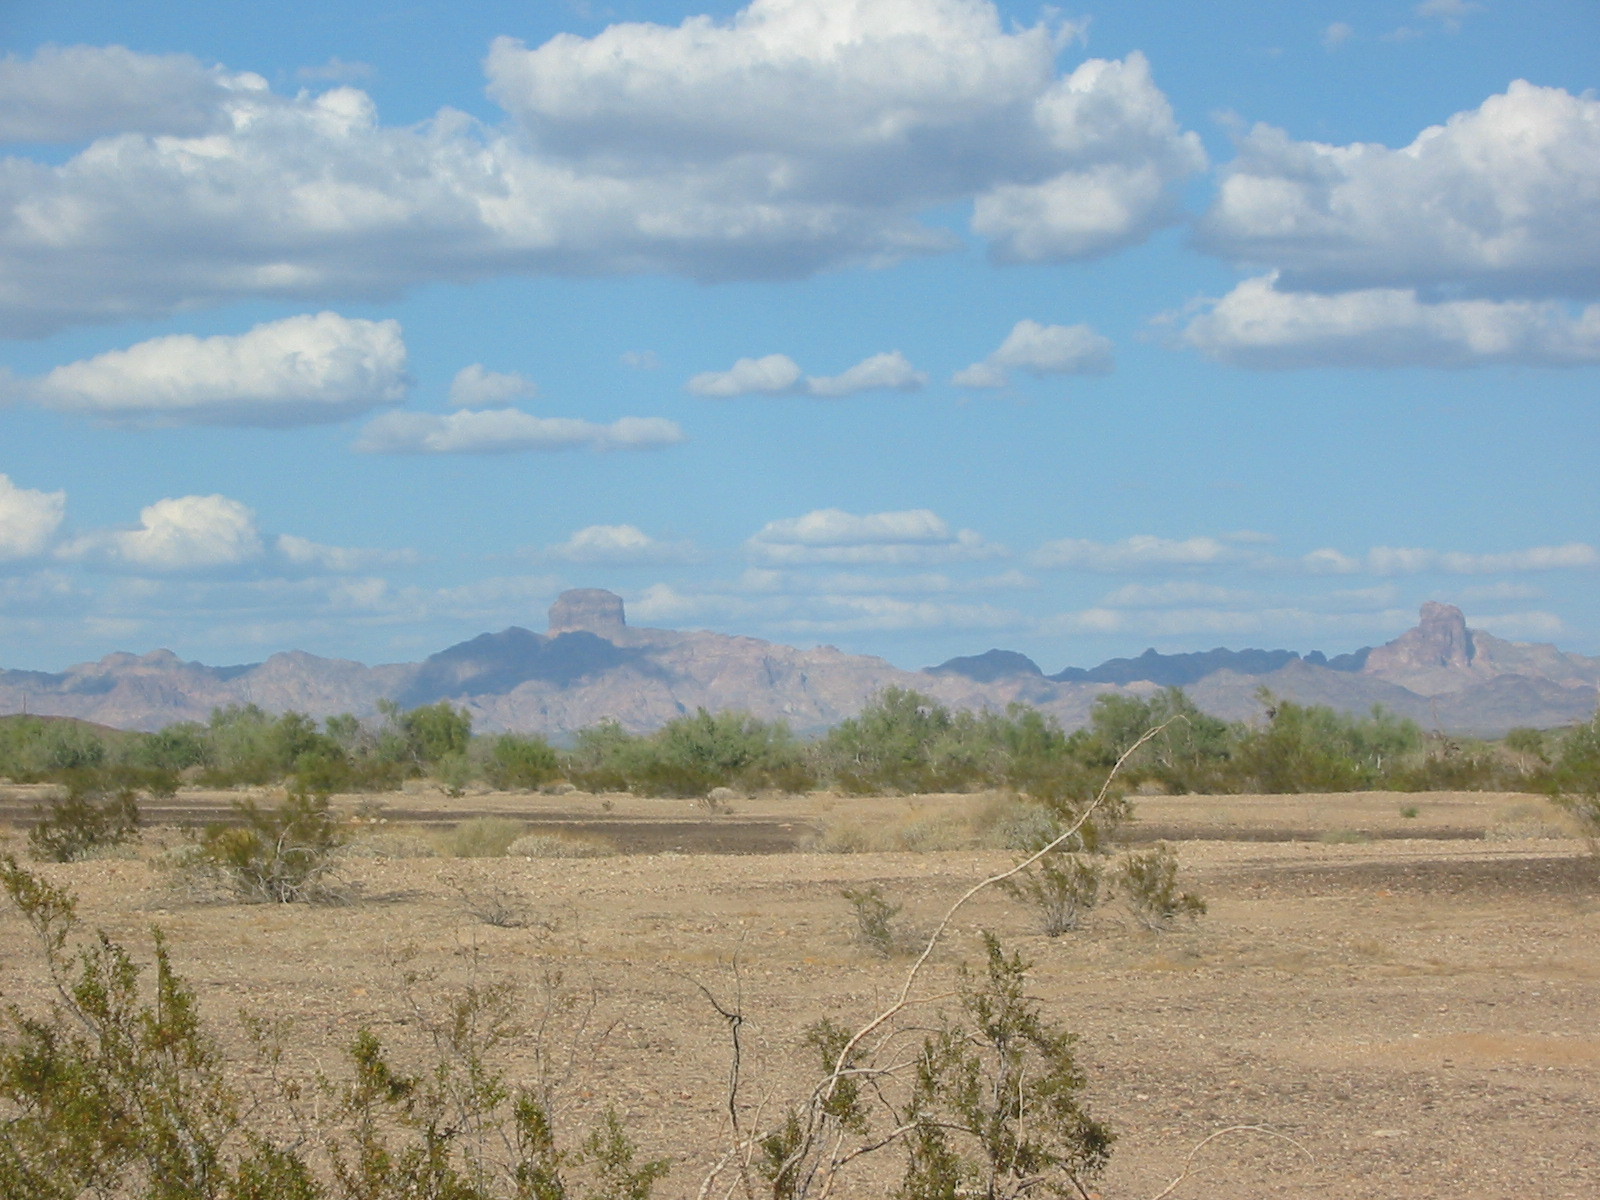 Desert buttes with desert vegetation in the foreground